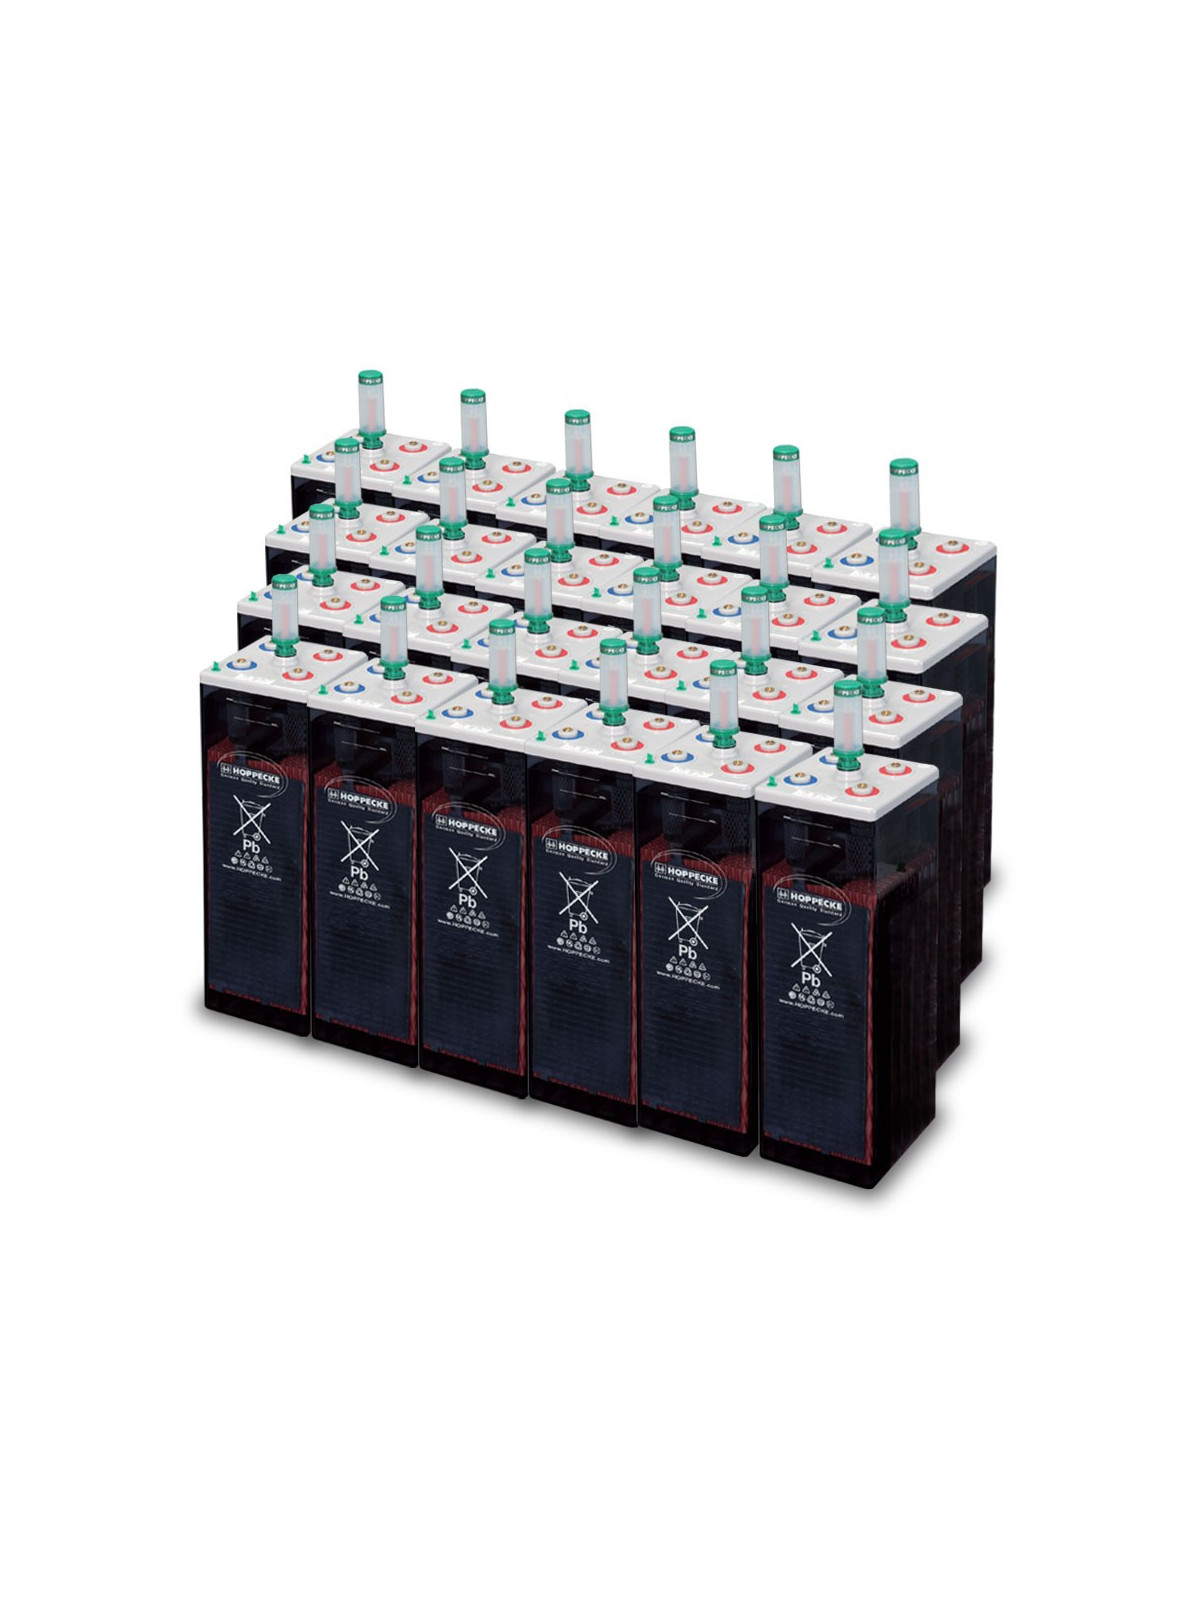 87 kWh OPzS 48V battery pack